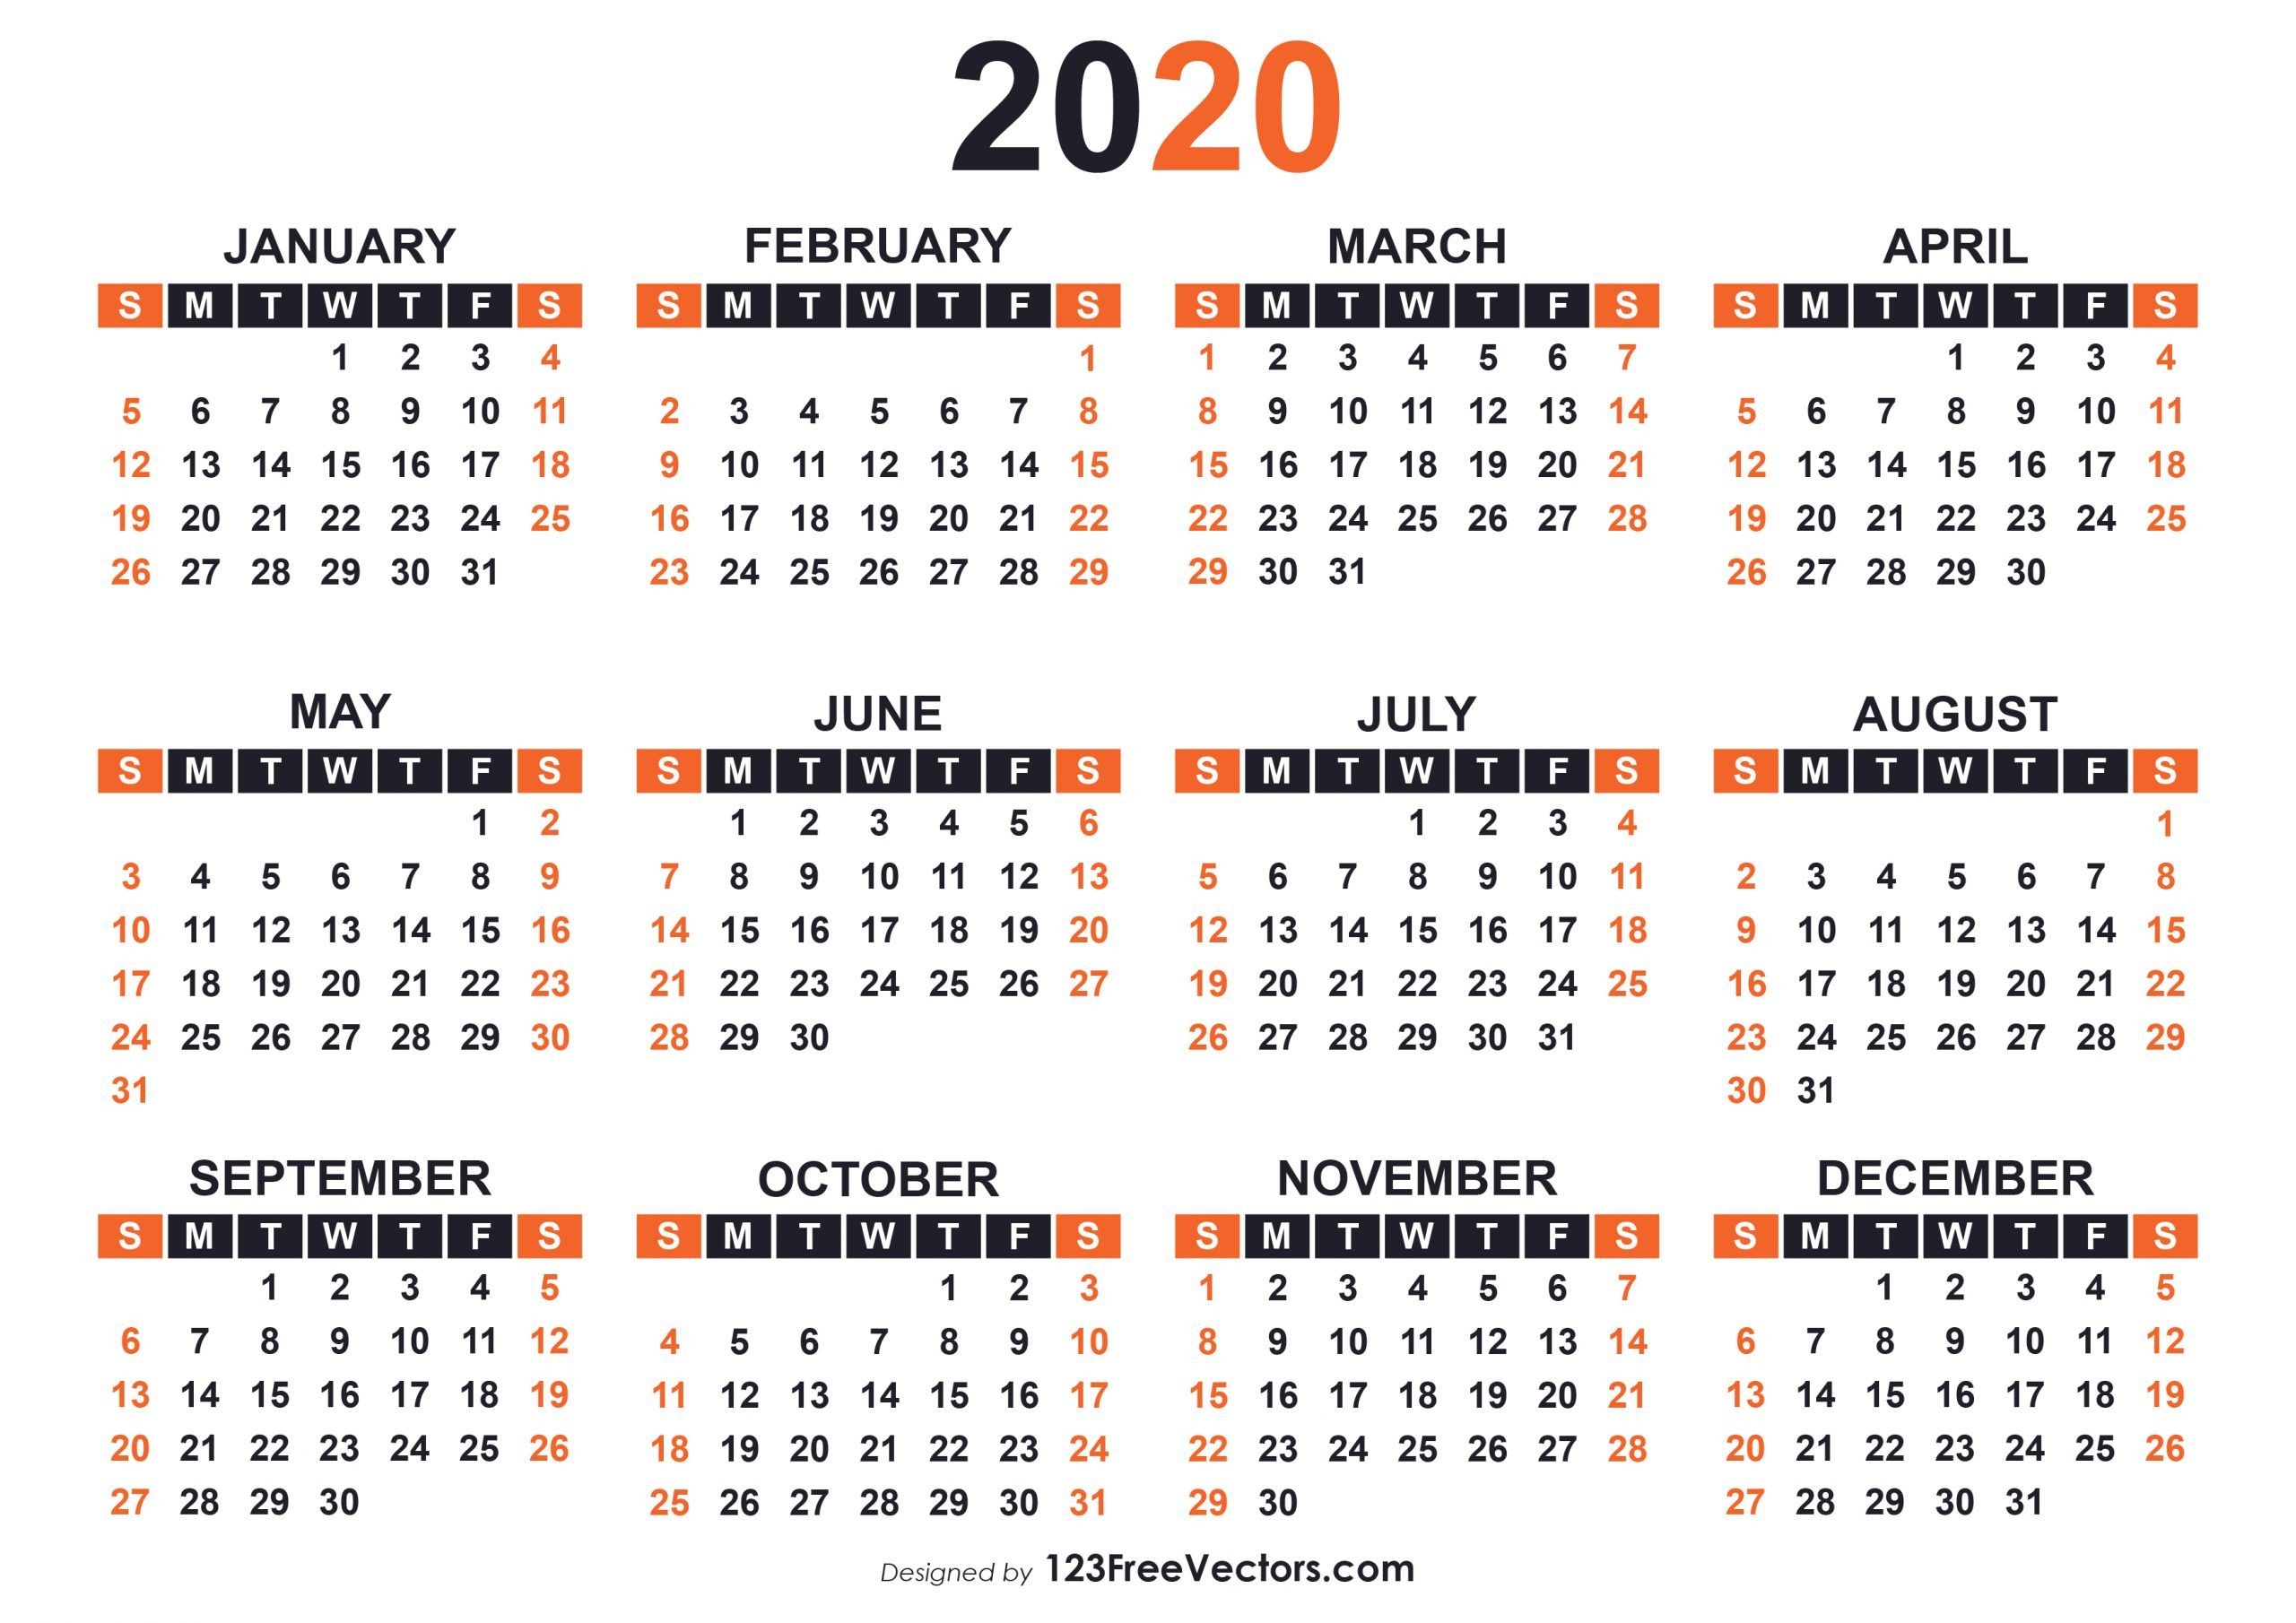 get print free calendars without downloading 2020